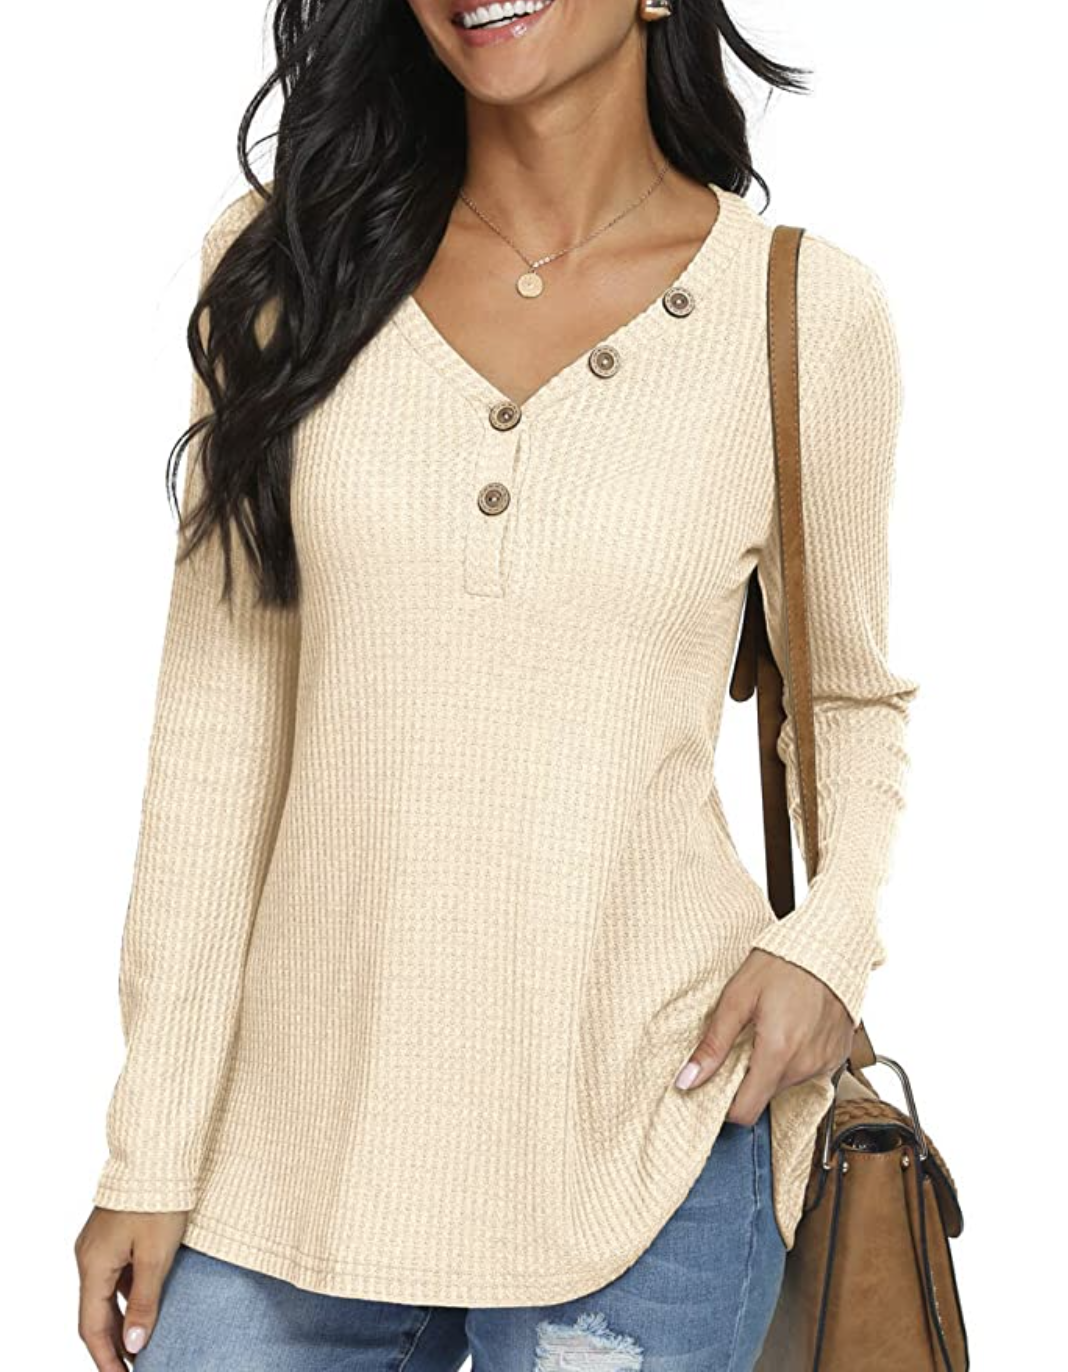 Shoppers Have Bought More Than One of These Waffle Knit Tops - WSBuzz.com